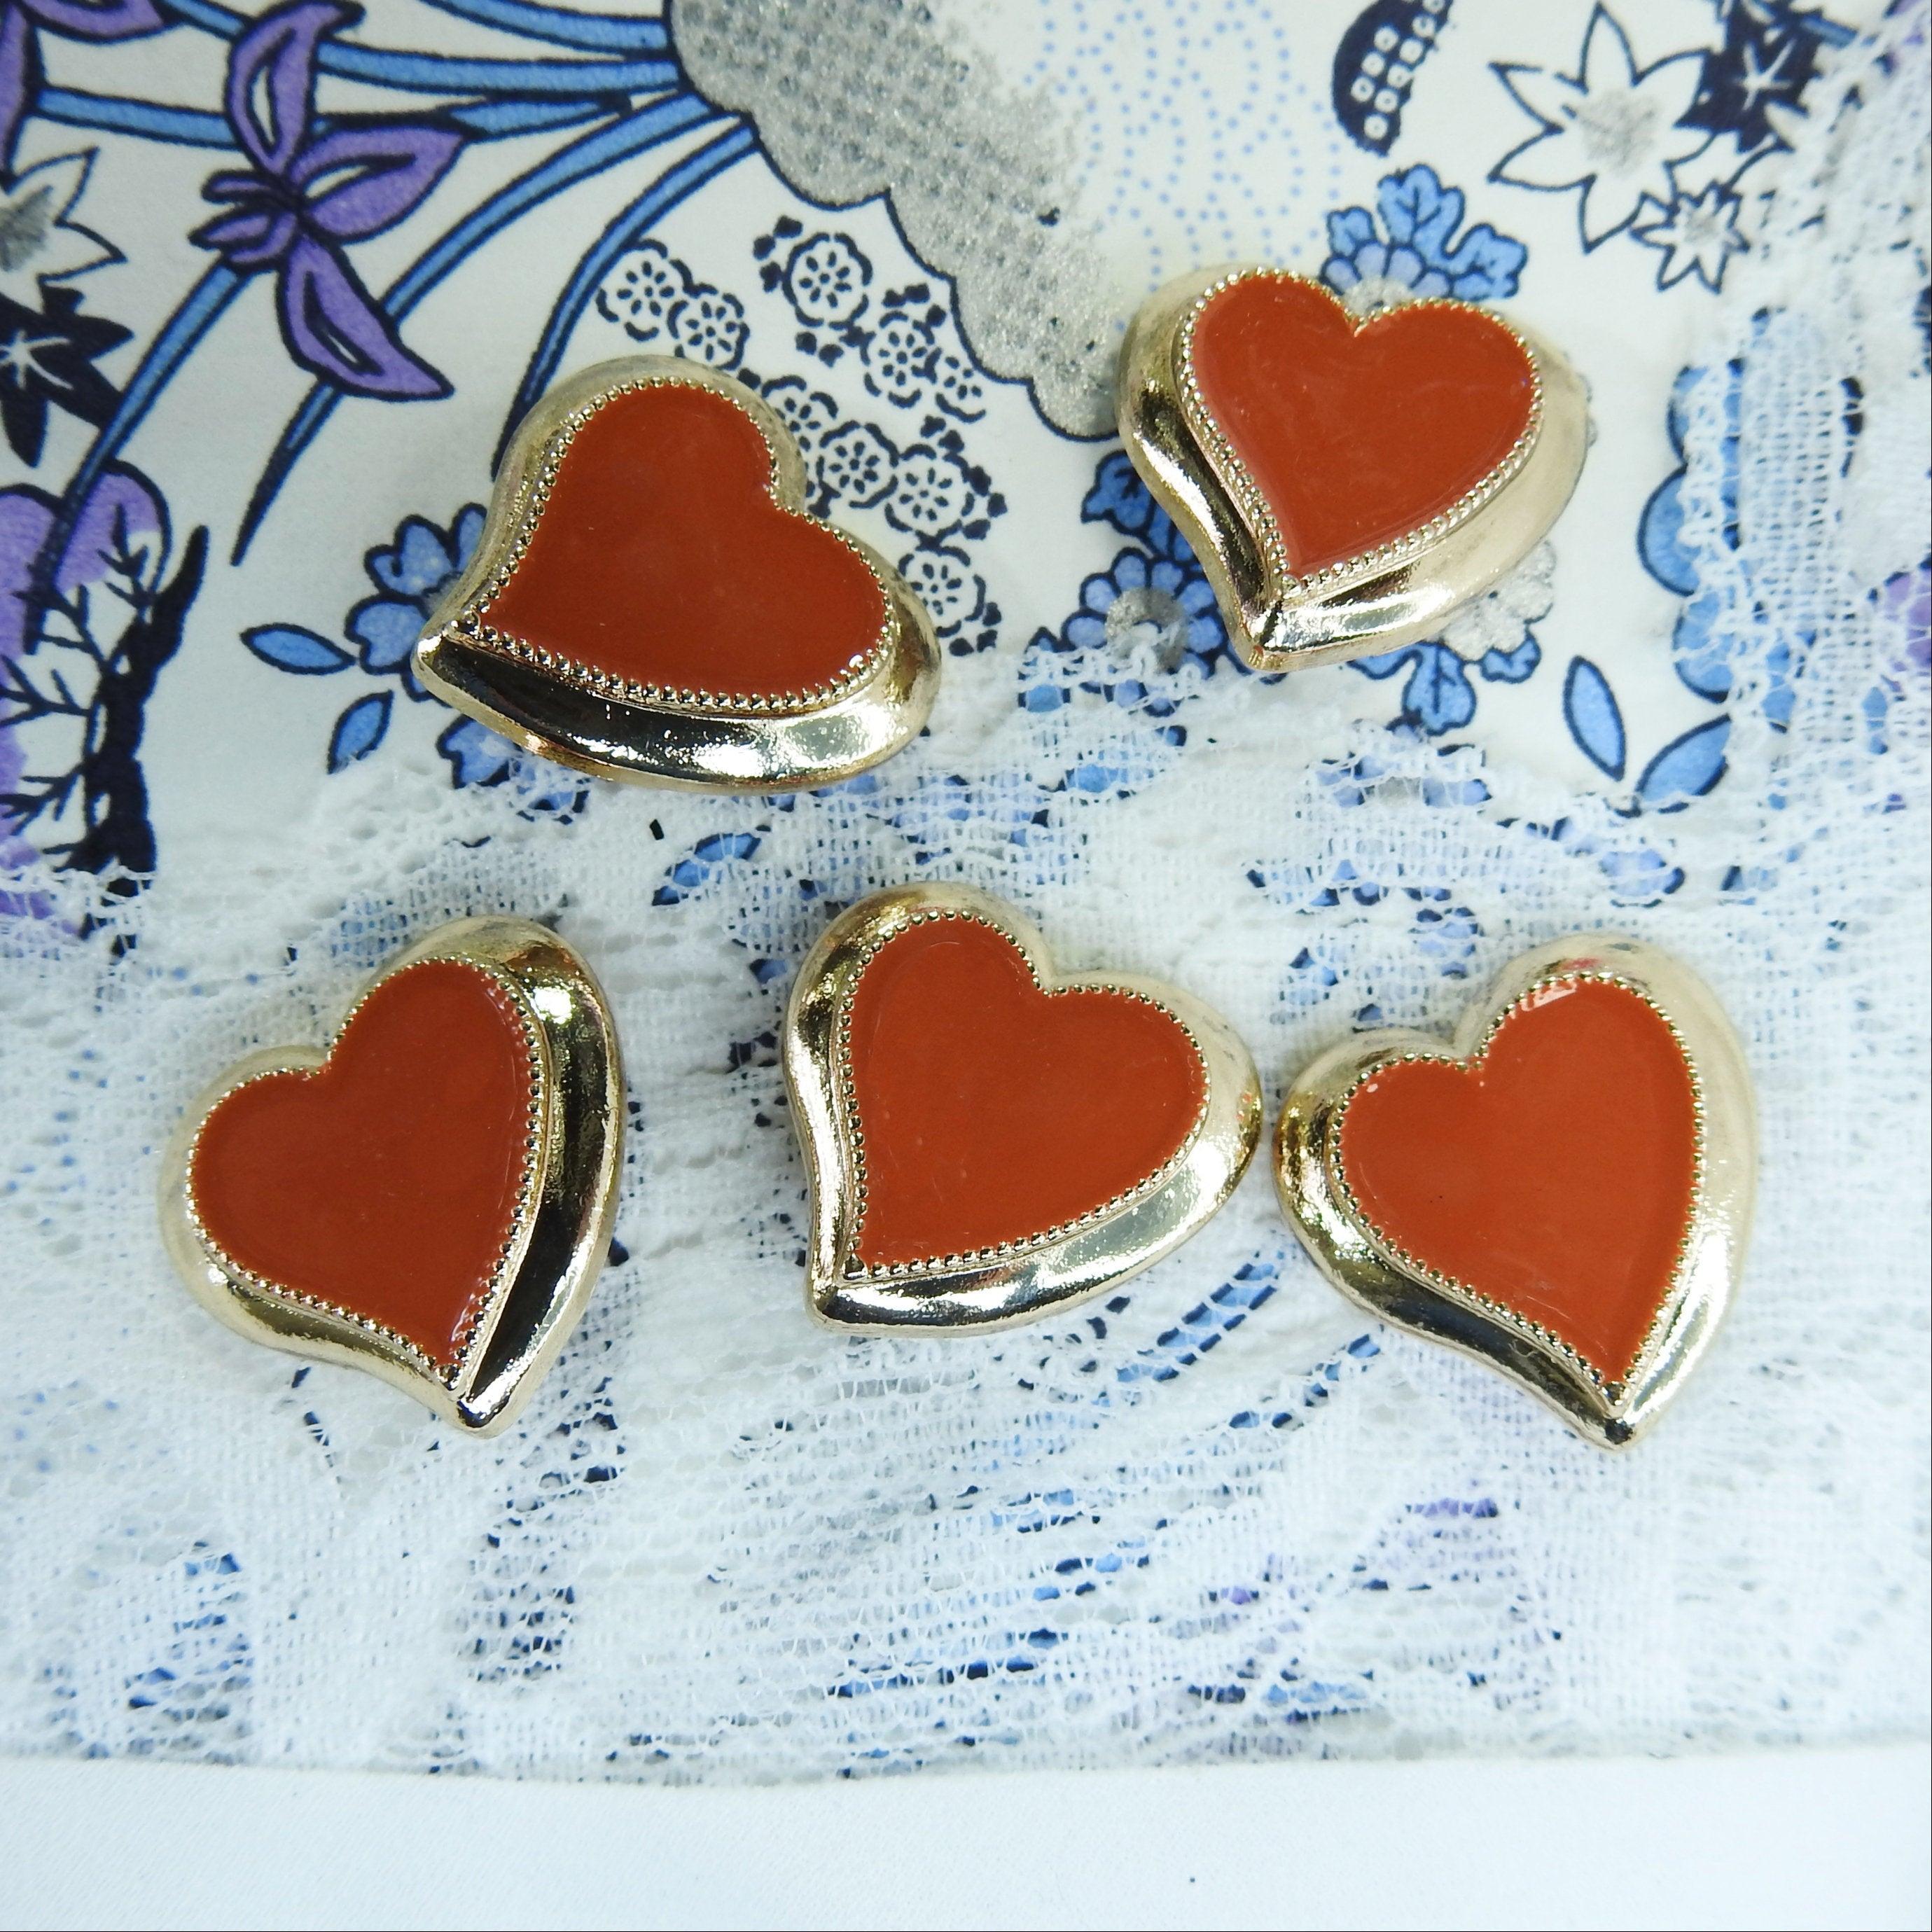 Retro Heart-shaped buttons